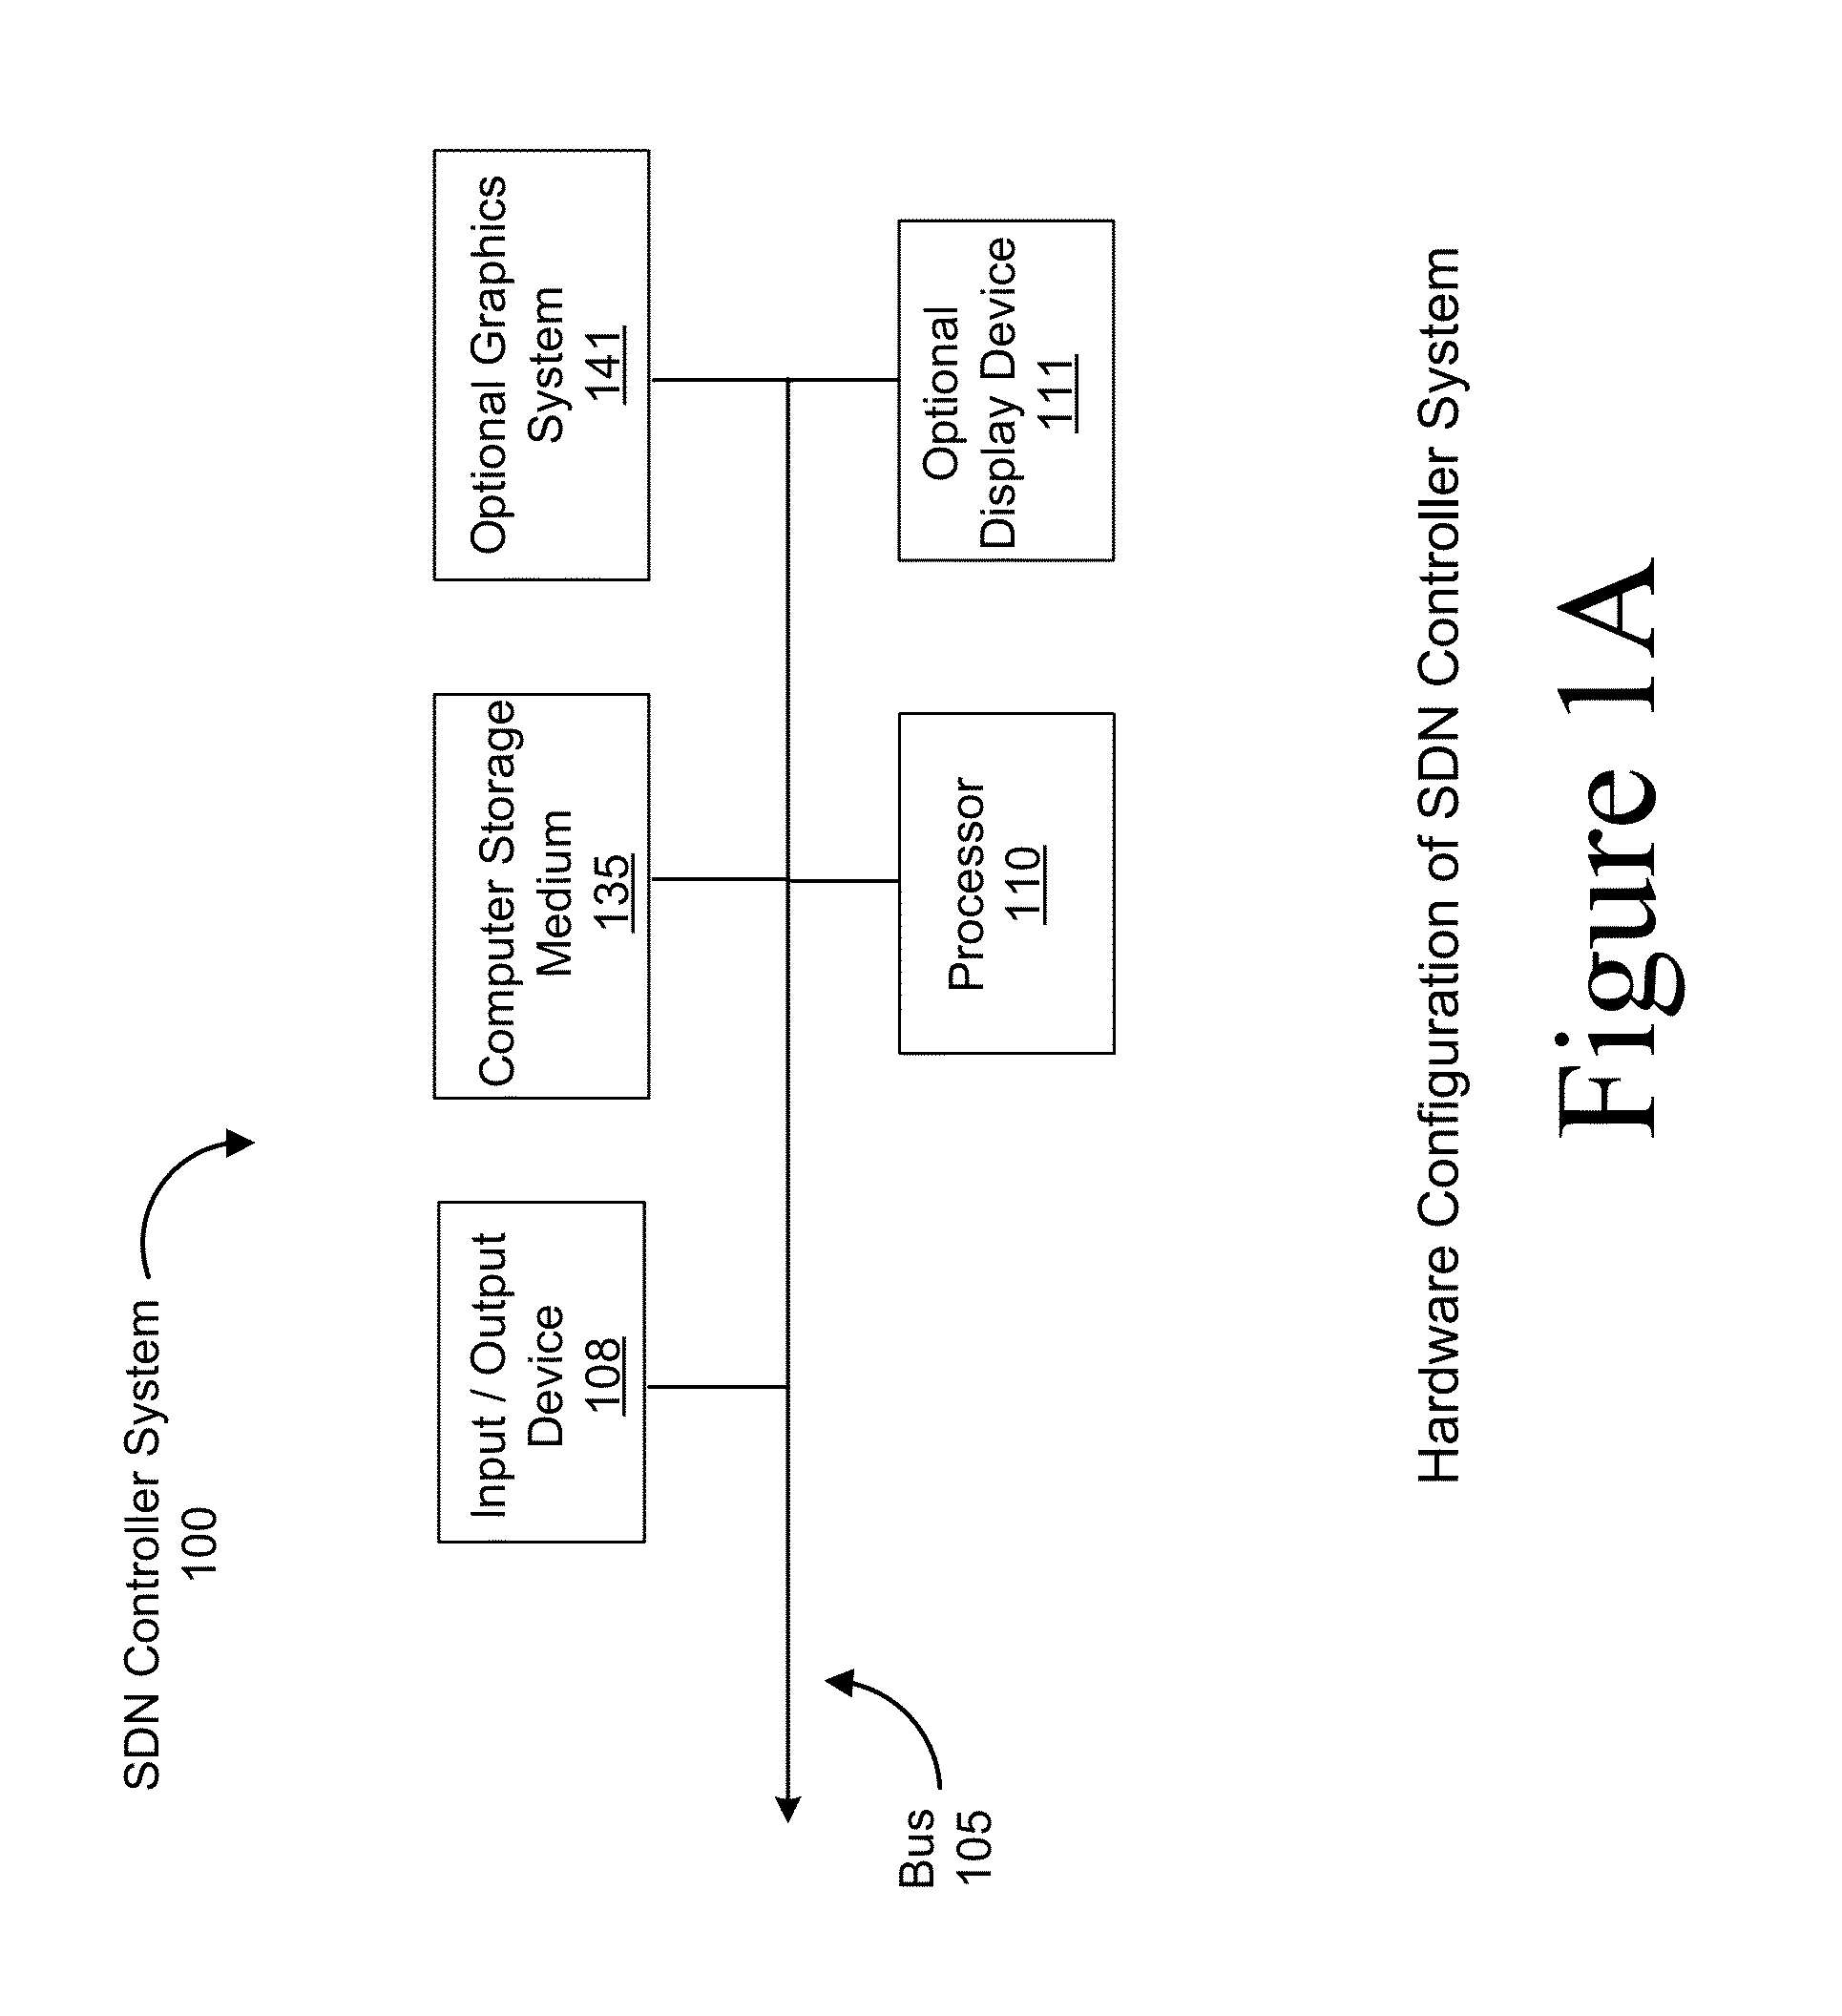 Physical switch initialization using representational state transfer services